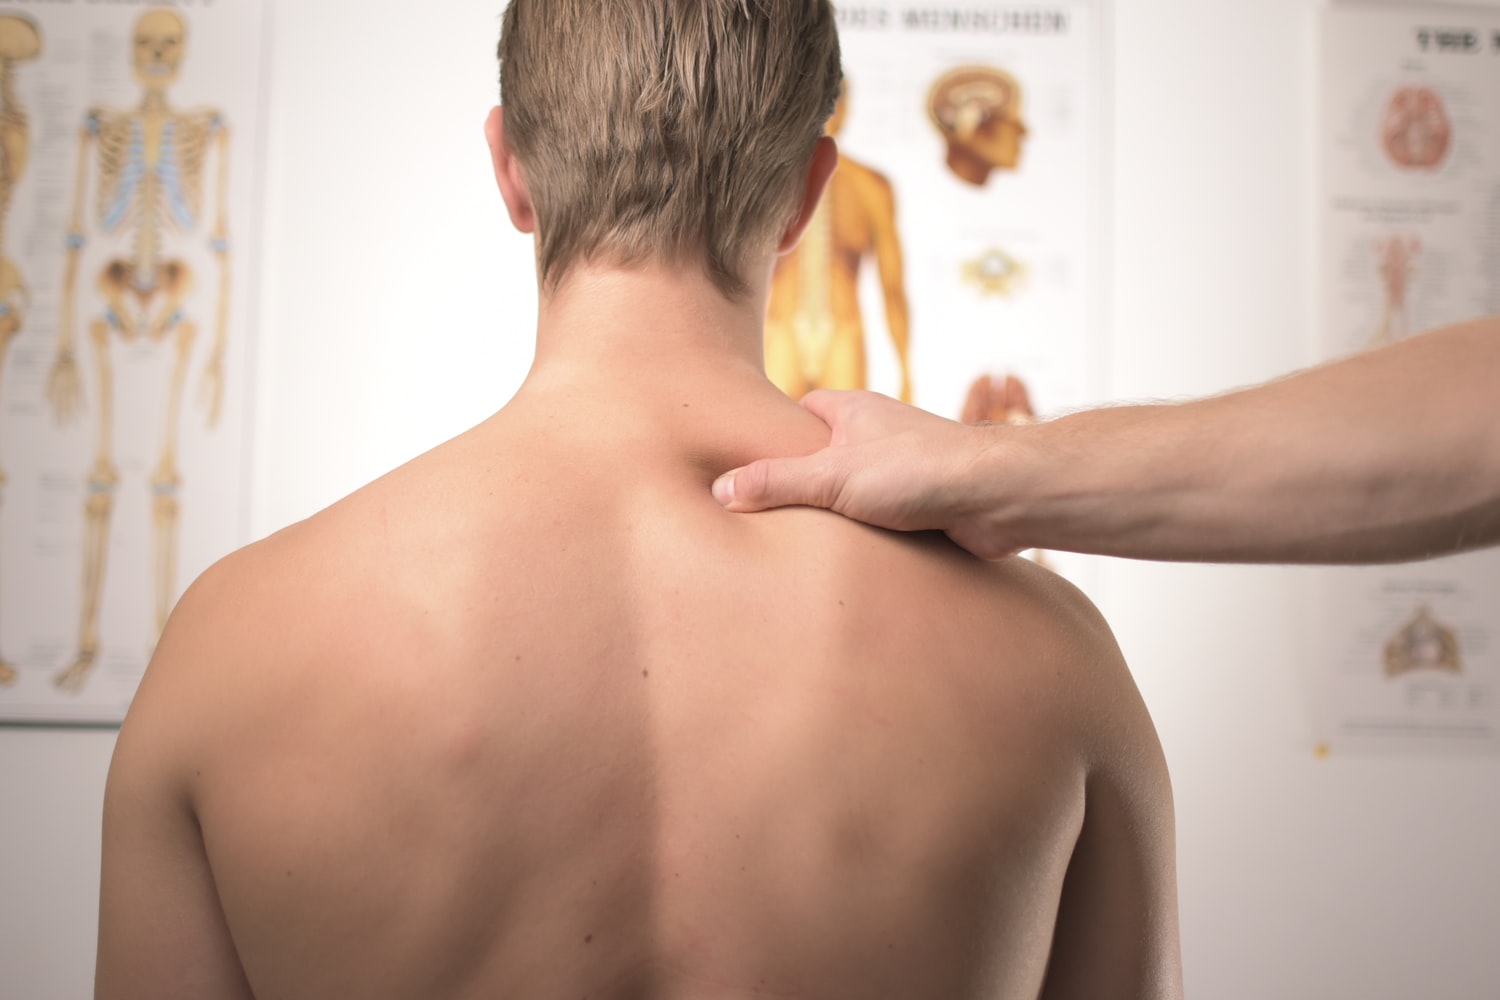 The Benefits of Physiotherapy for Back Pain